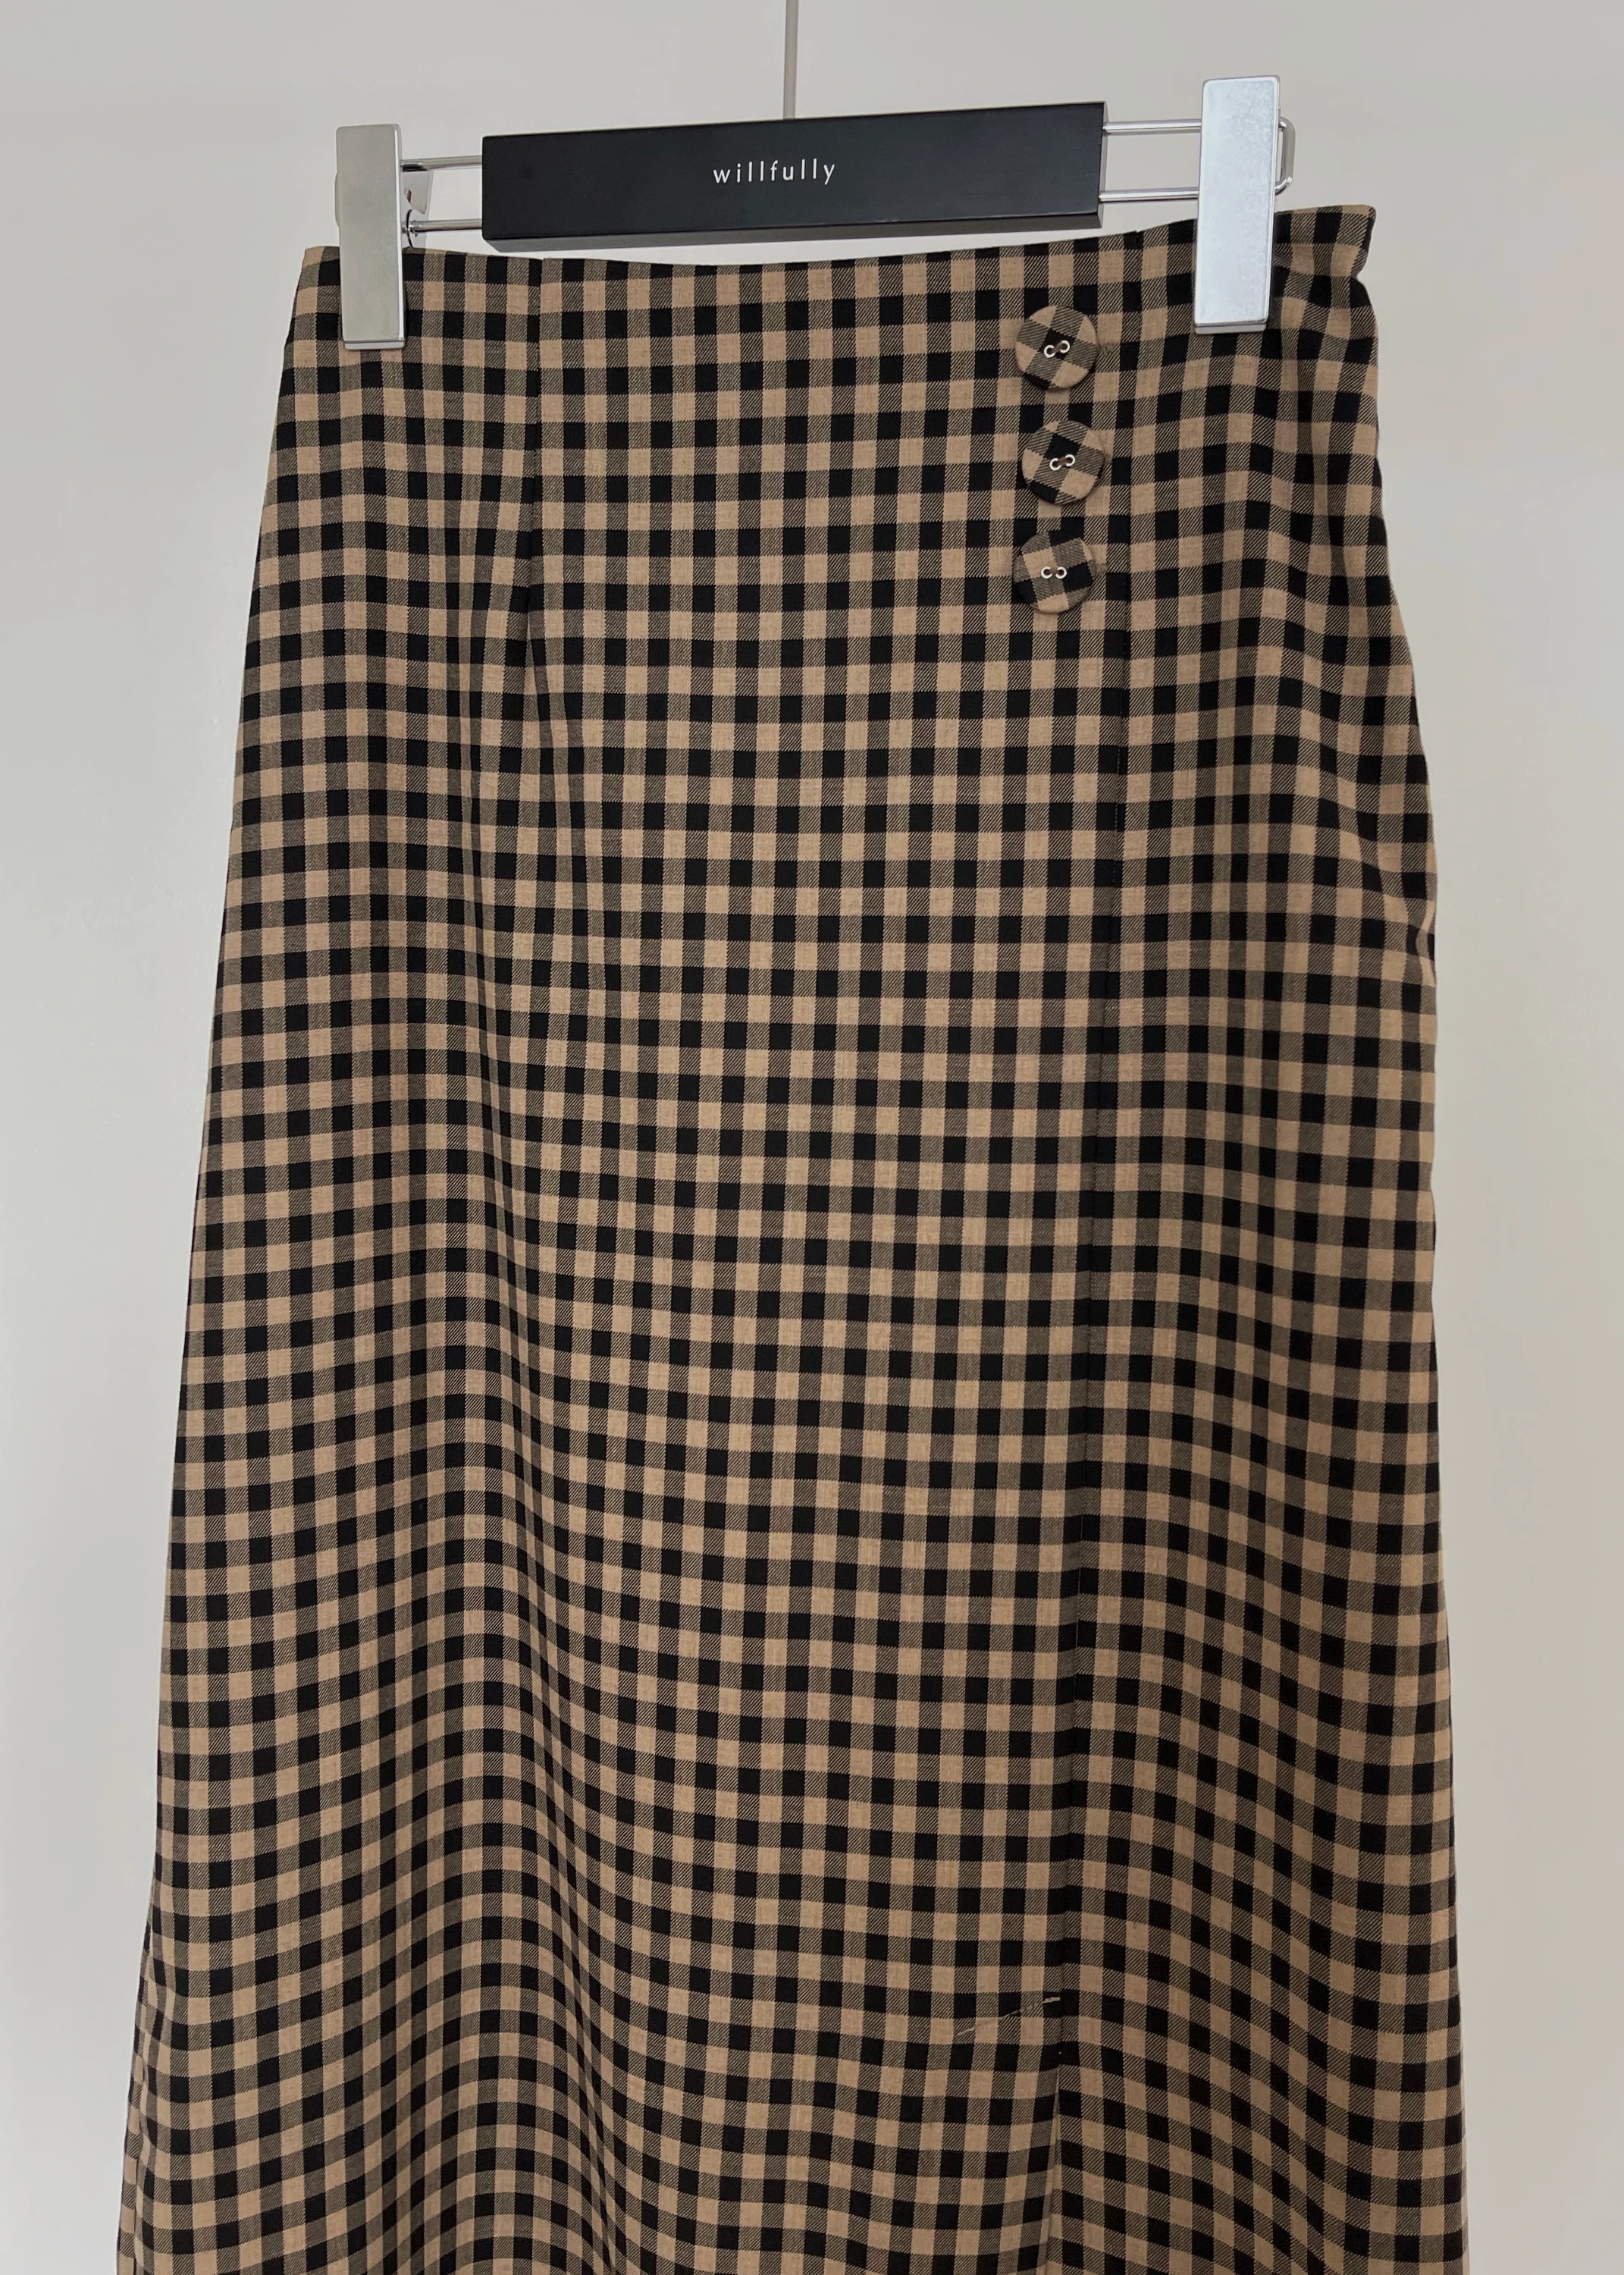 gingham check pencil SK / willfully（ウィルフリー）のskirt通販